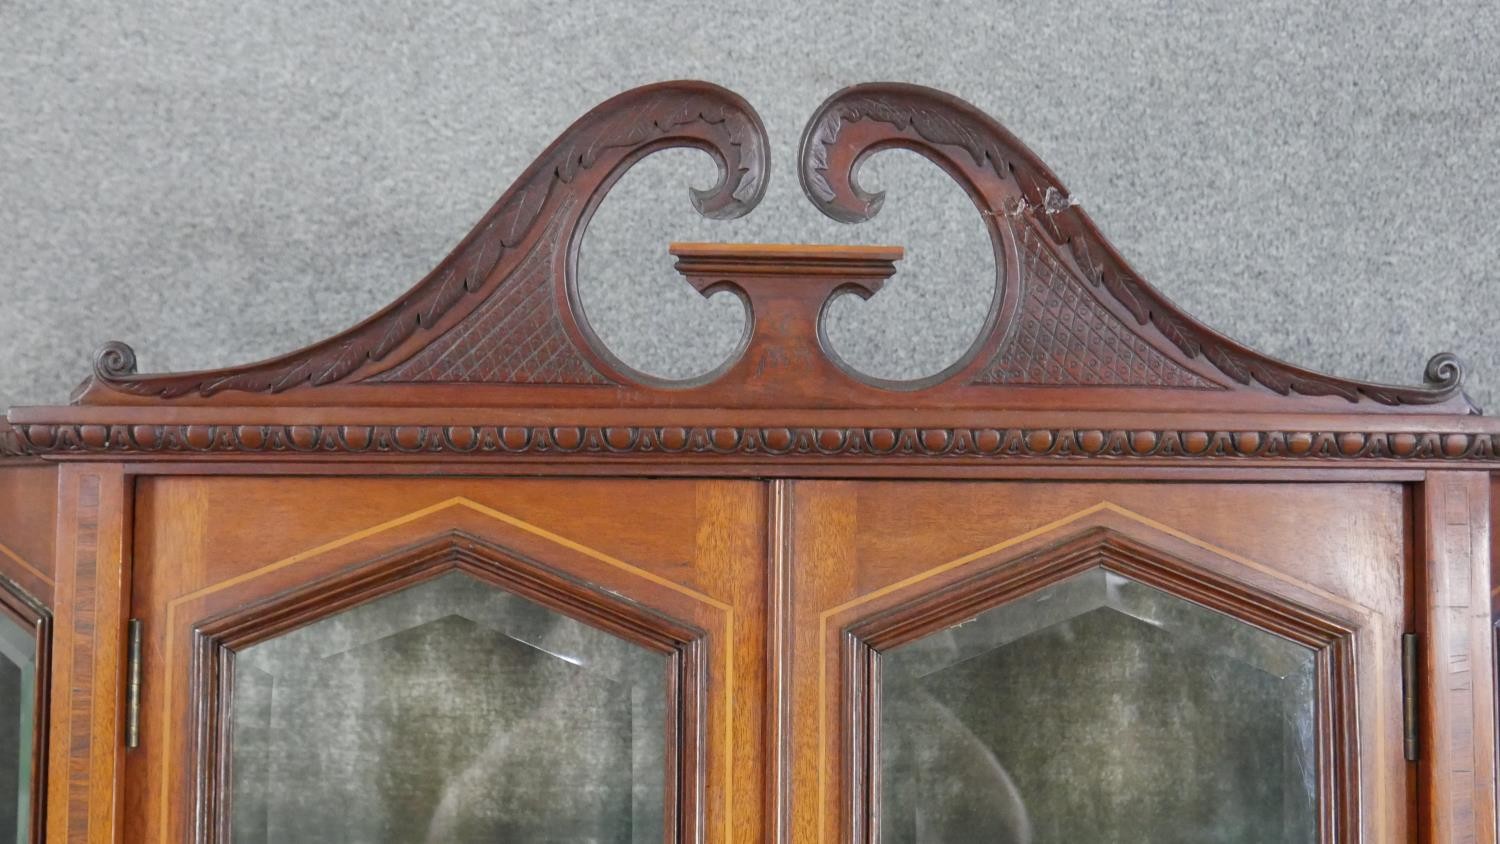 An Edwardian mahogany display cabinet, with a swan neck pediment, over a pair of bevelled glass - Image 2 of 8